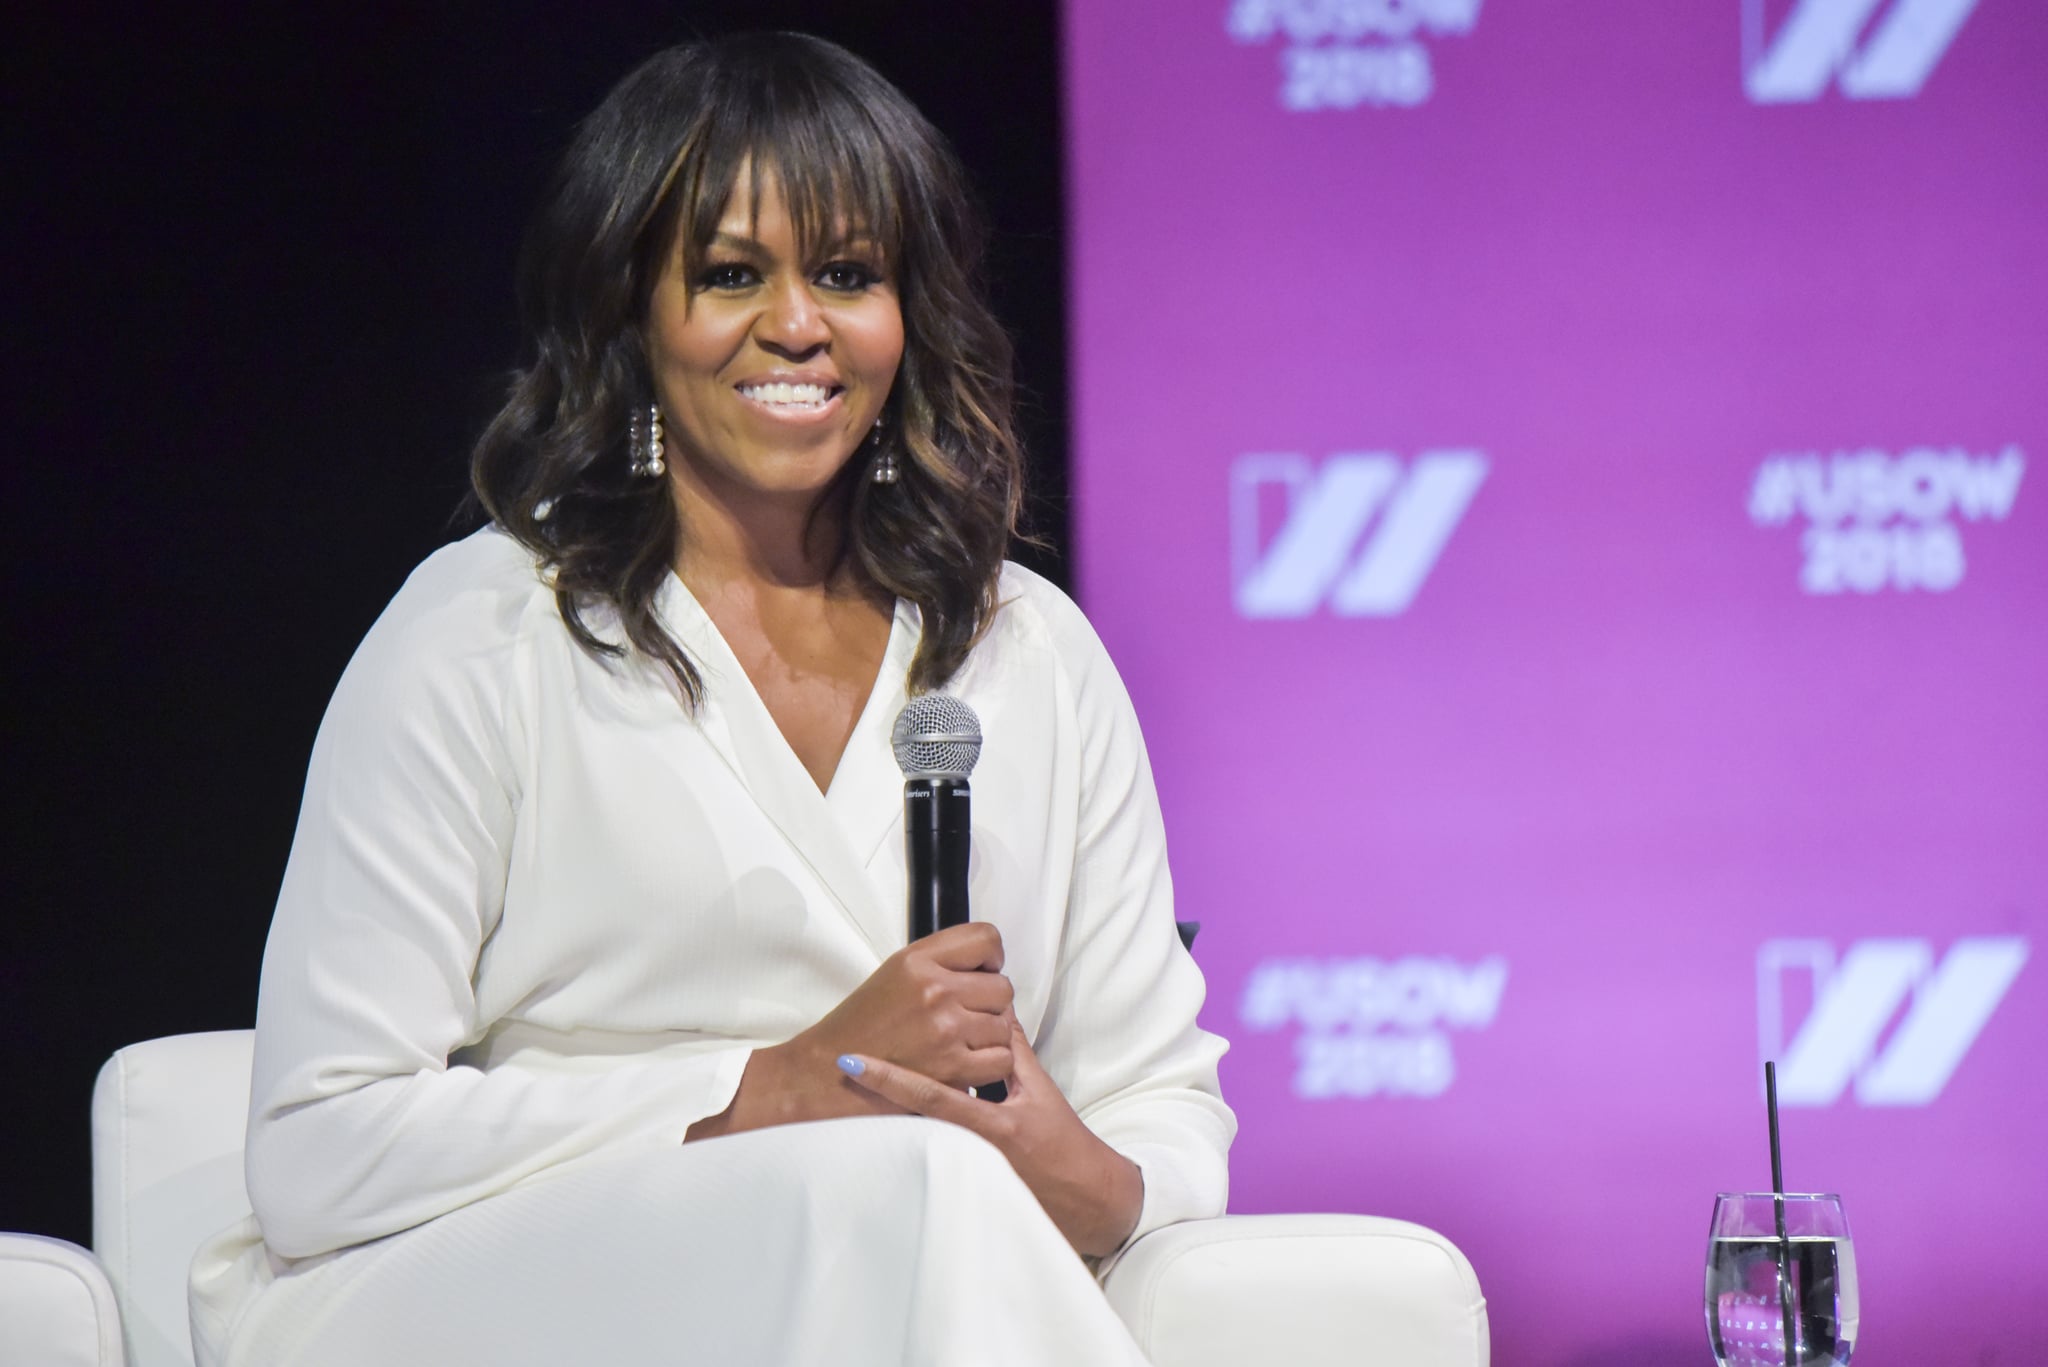 LOS ANGELES, CA - MAY 05:  Former First Lady of The United States Michelle Obama speaks on stage at The United State of Women Summit 2018 - Day 1 on May 5, 2018 in Los Angeles, California.  (Photo by Rodin Eckenroth/Getty Images)